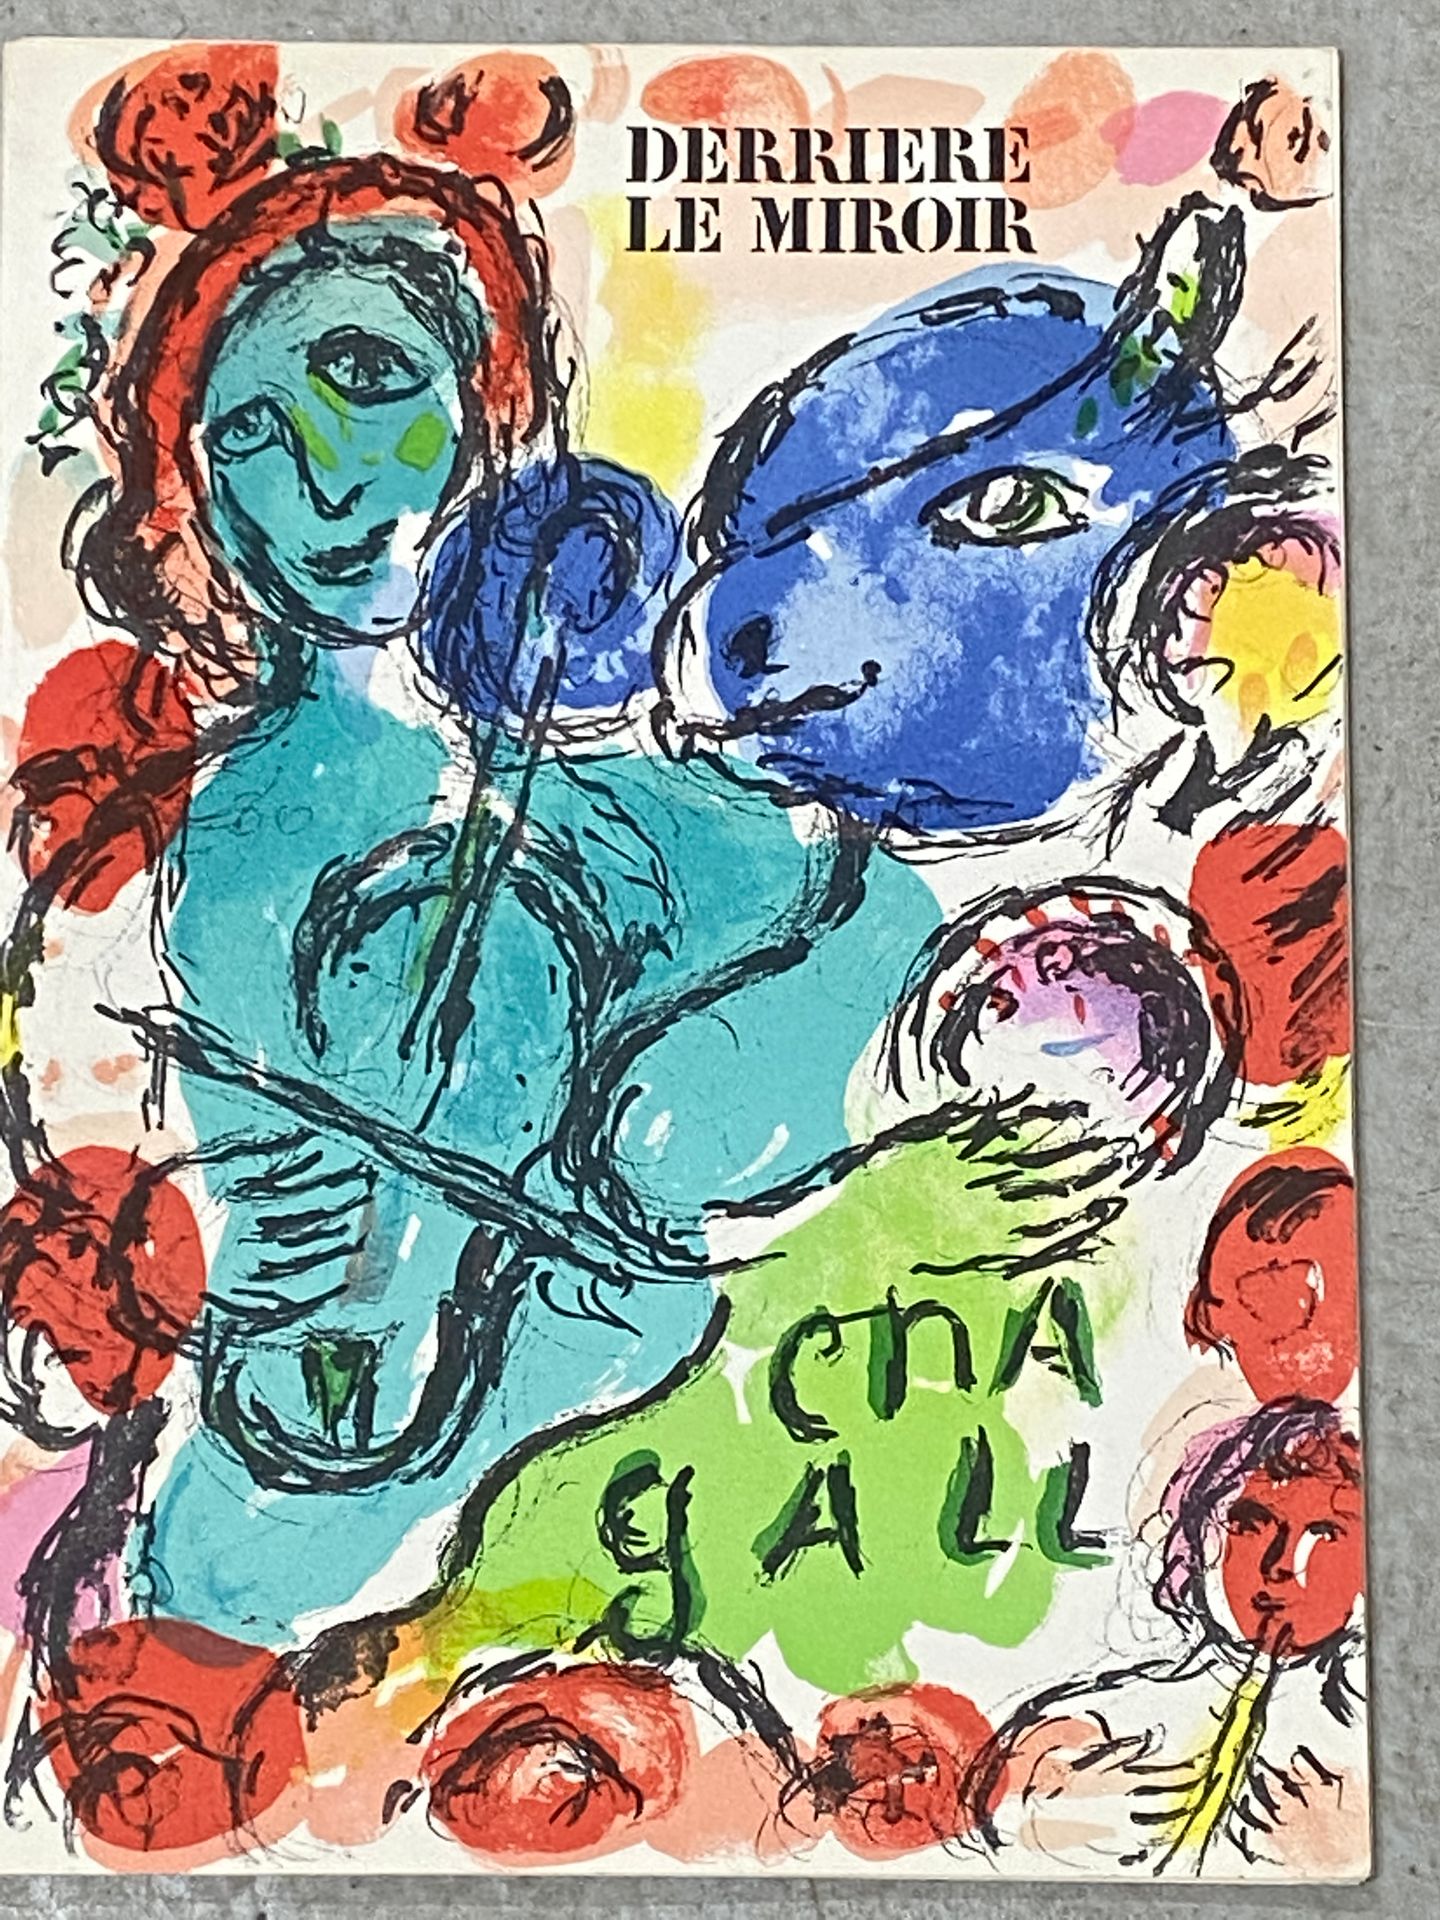 Null BEHIND THE MIRROR

Text by Louis Aragon and illustrations by Marc CHAGALL

&hellip;